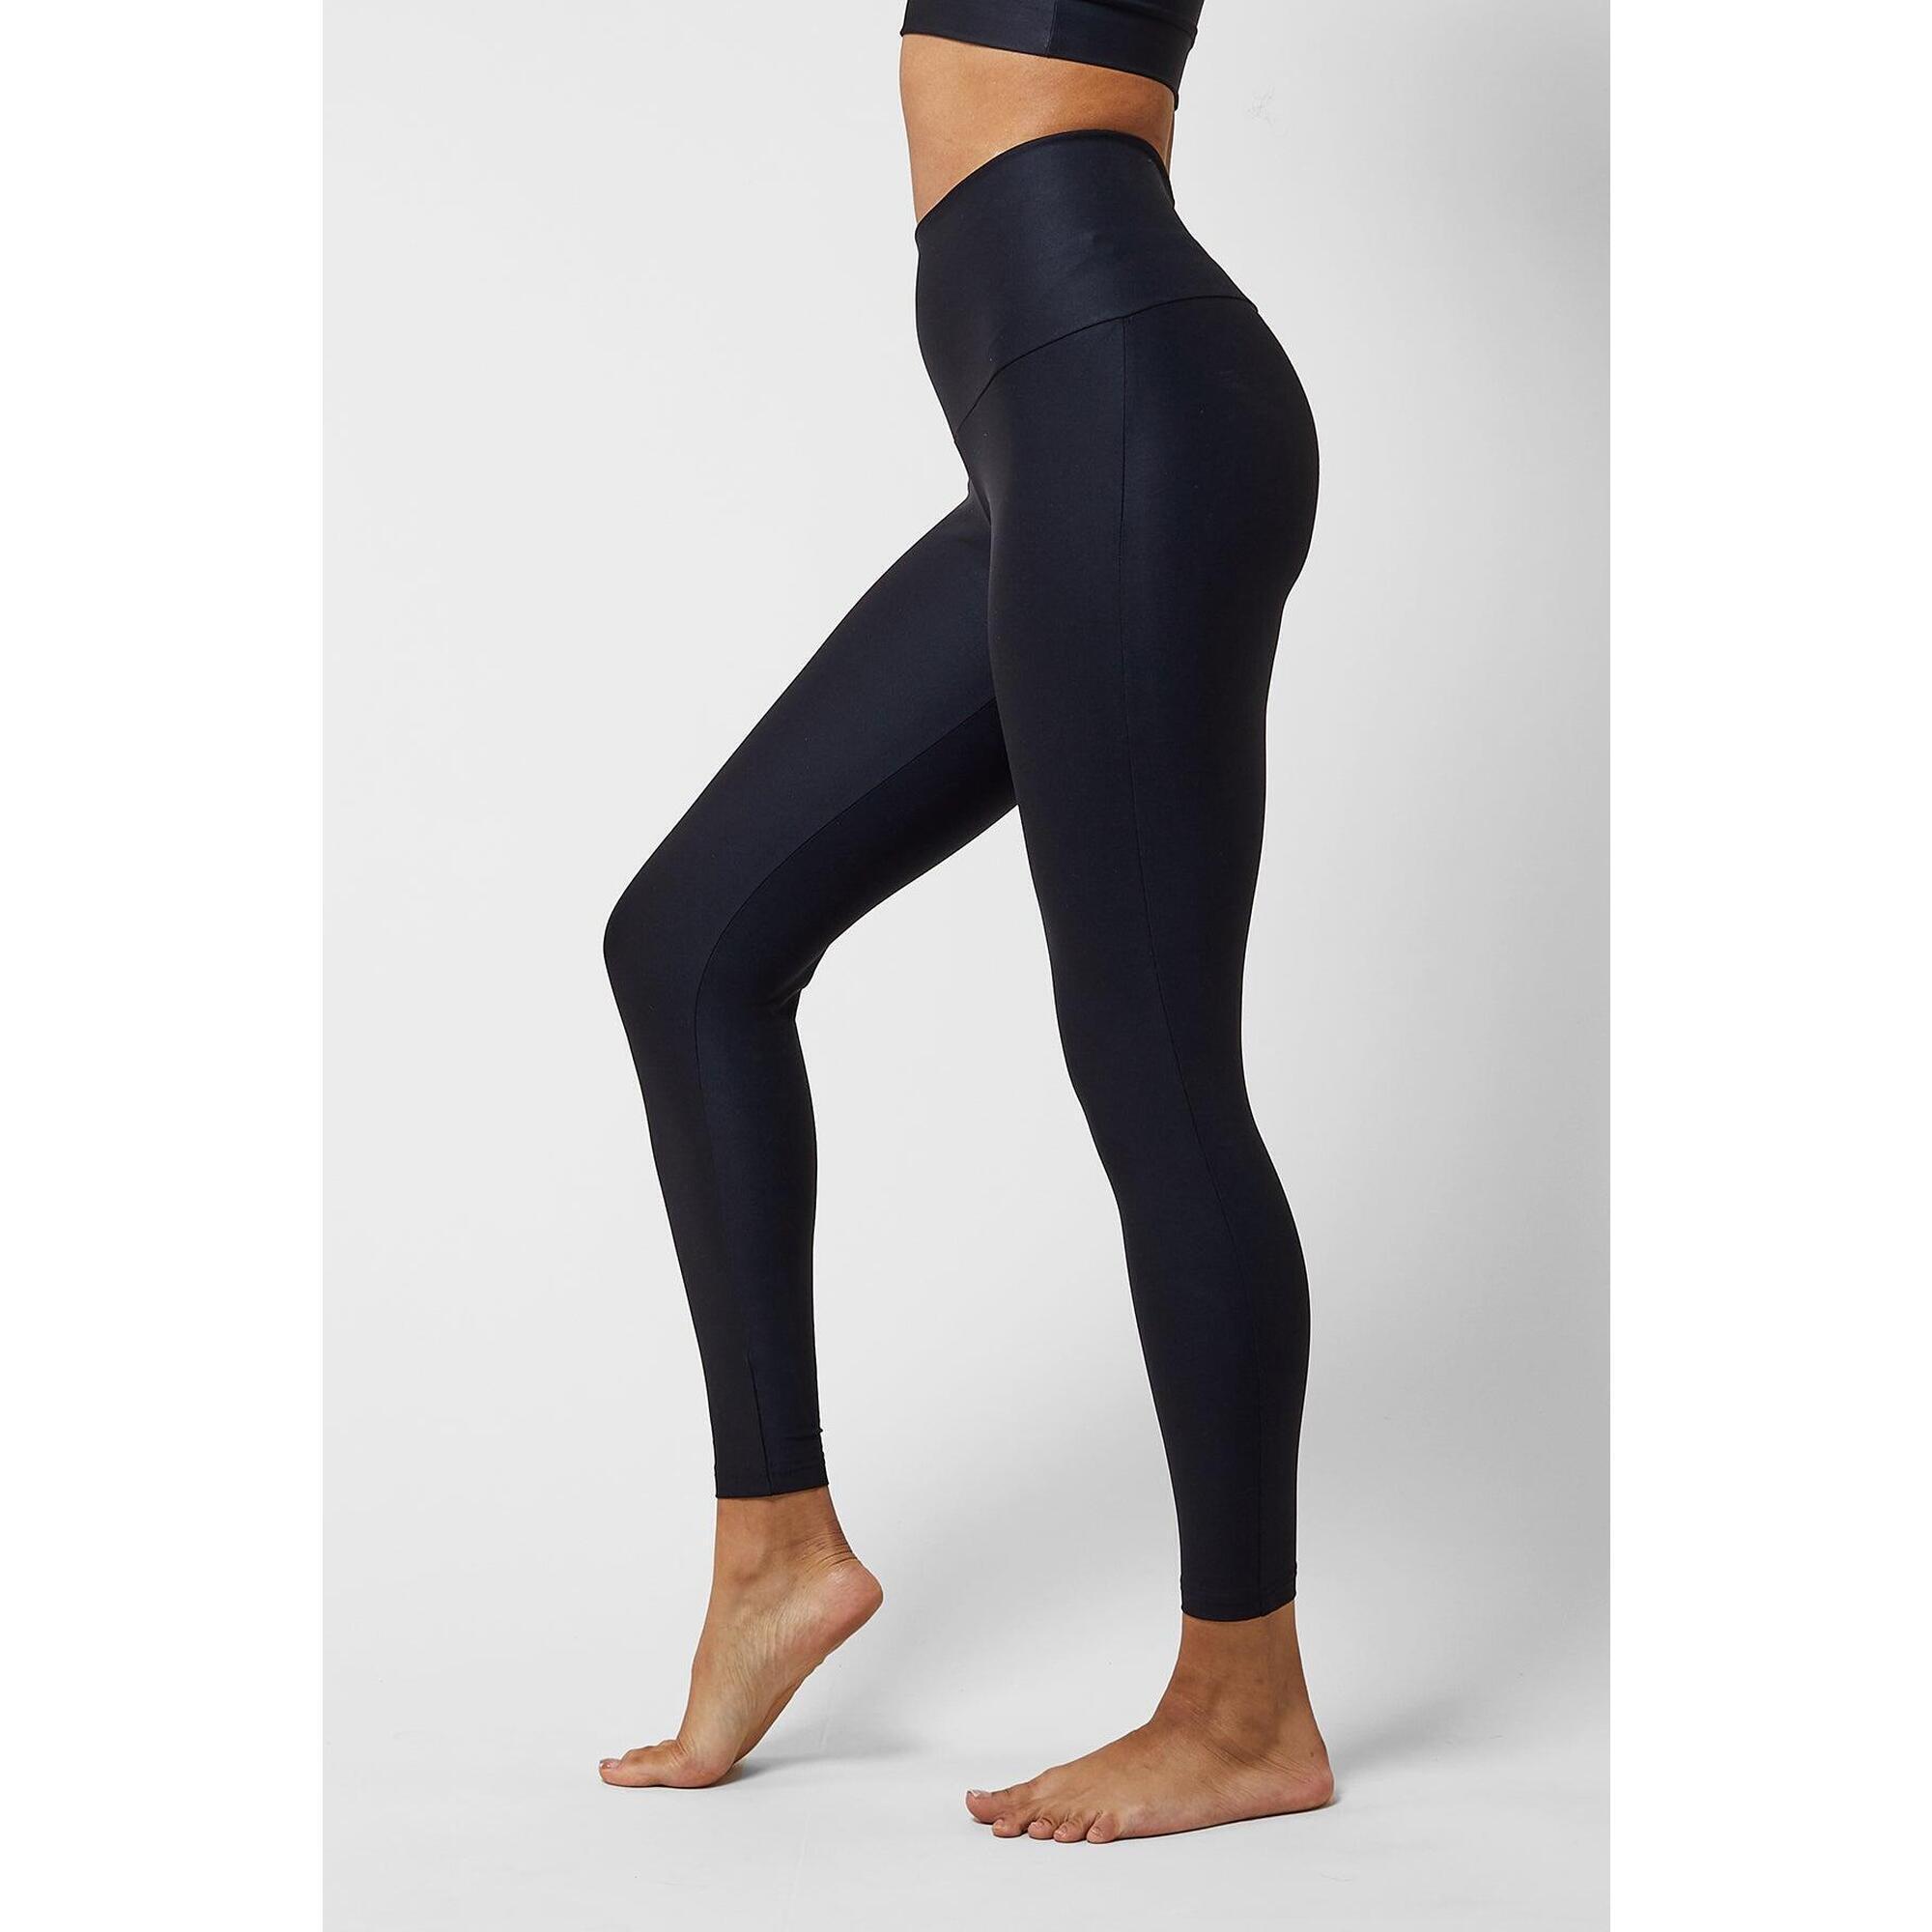 TLC SPORT Extra Strong Compression Curve Running Leggings with Tummy Control Black